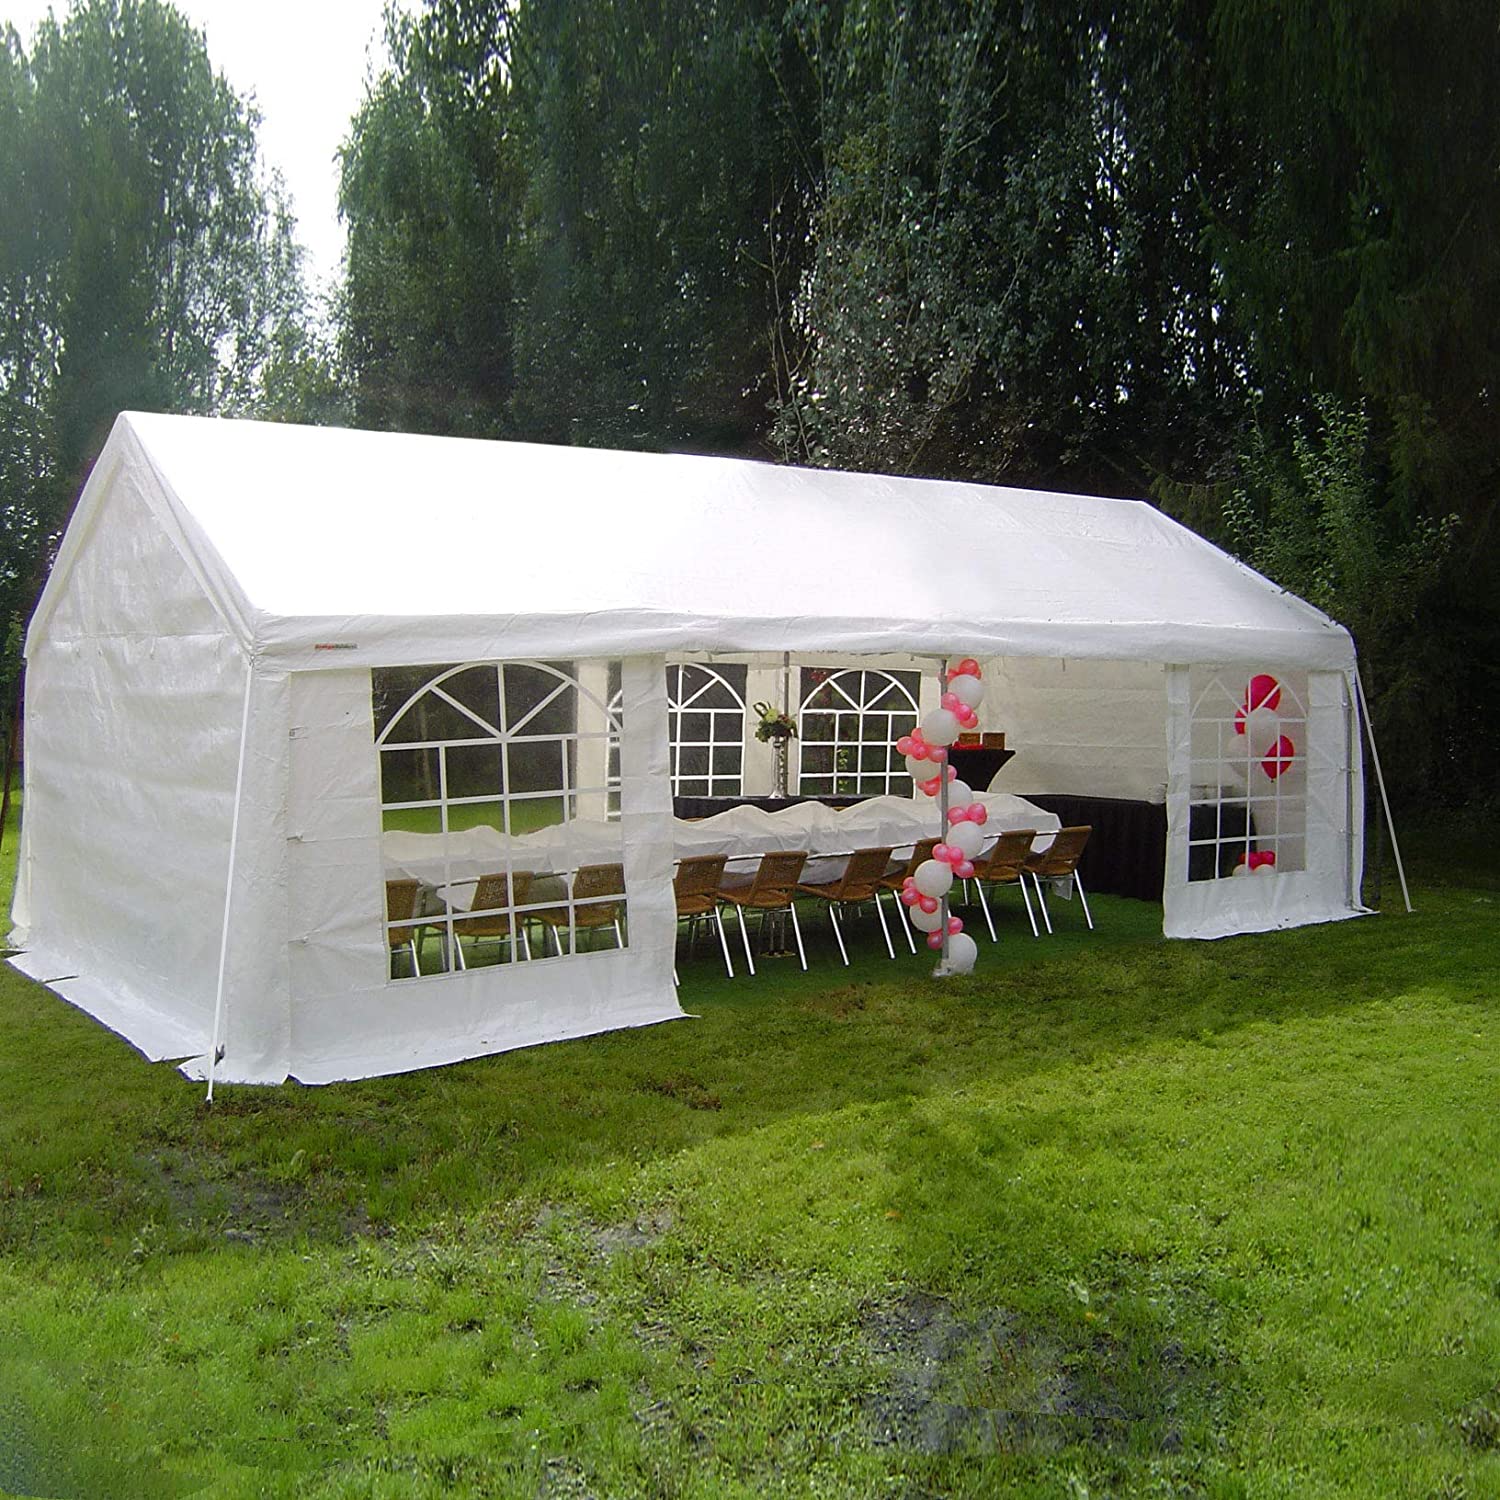 13' x 26' Party Tent with sides